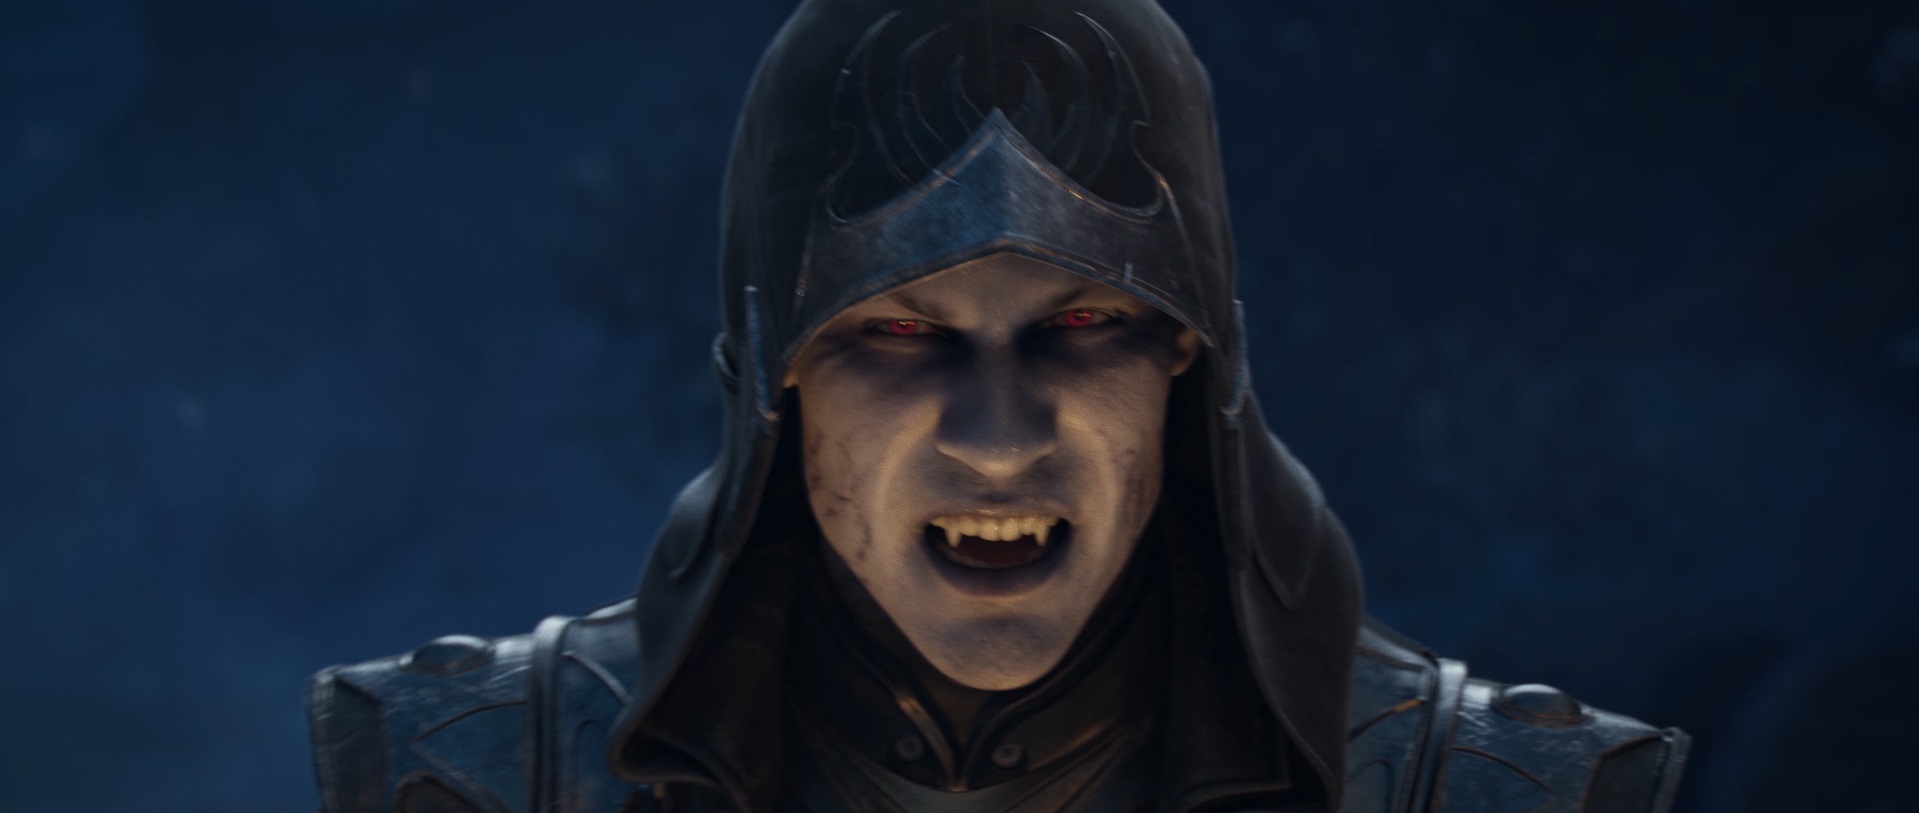 skyrim vampire lord first person